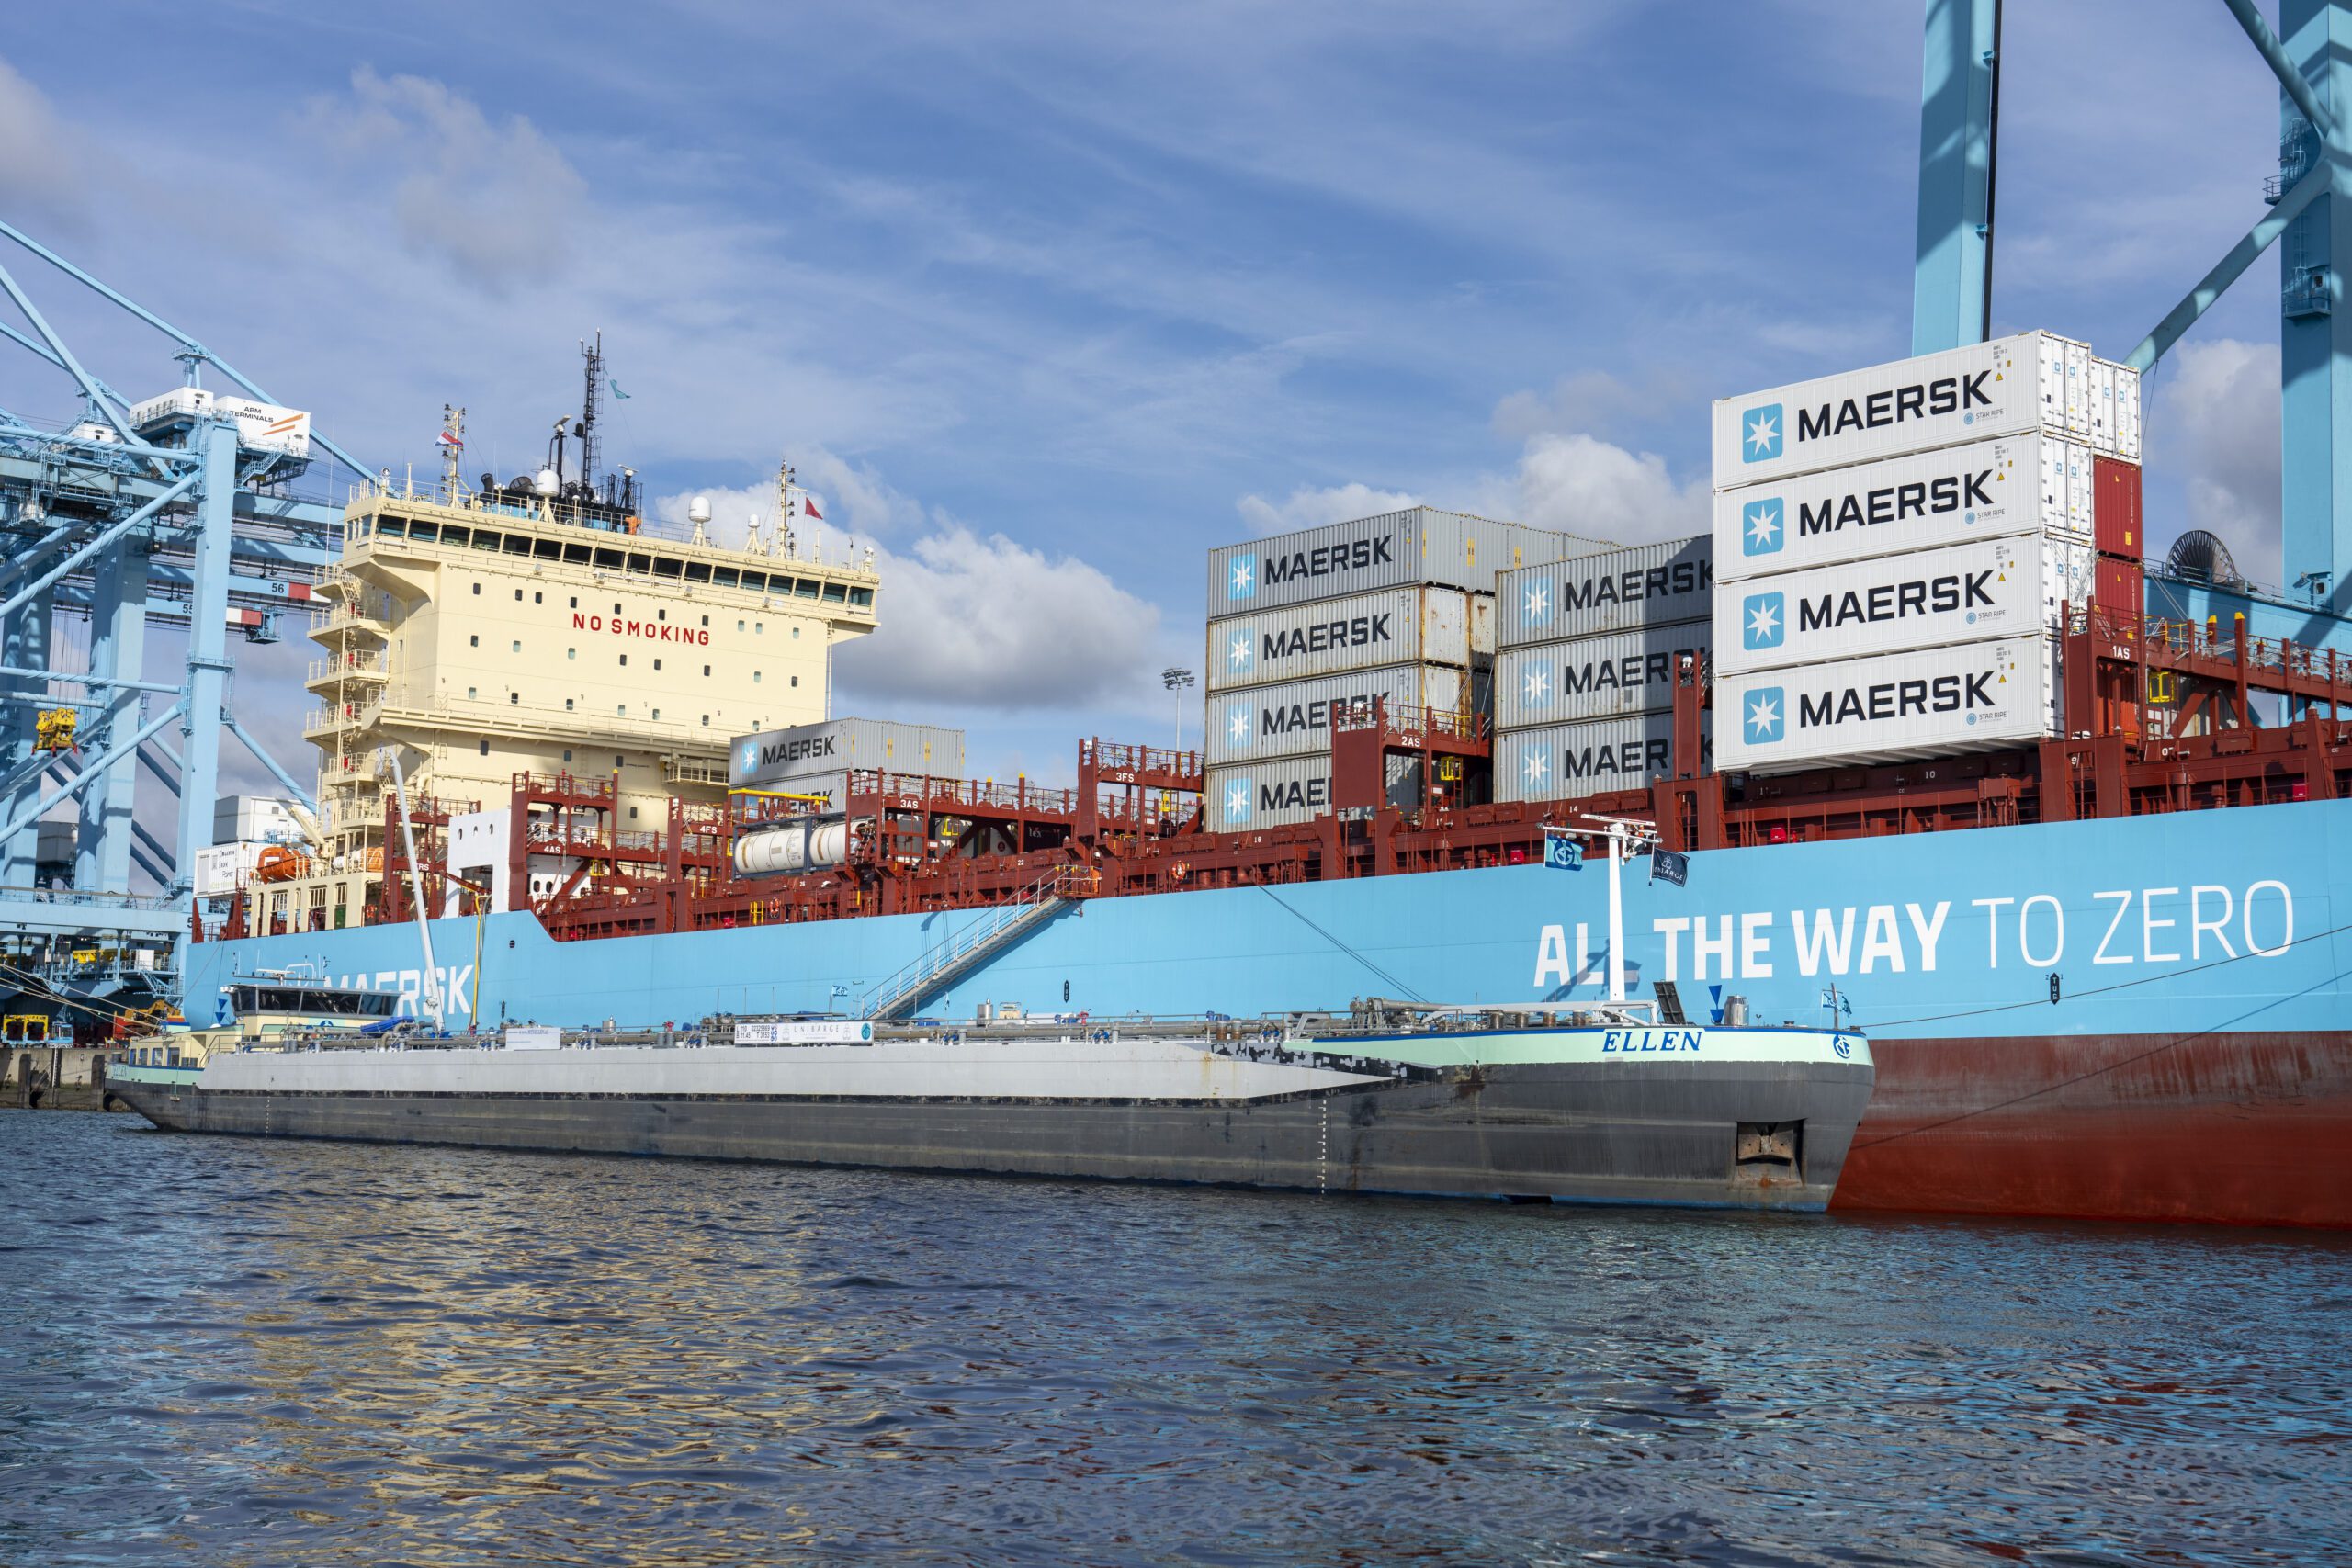 The world’s first green methanol fueled container ship has bunkered in the Port of Rotterdam, taking on OCI HyFuels green methanol for the final leg of its maiden voyage. Photo credit: OCI Global